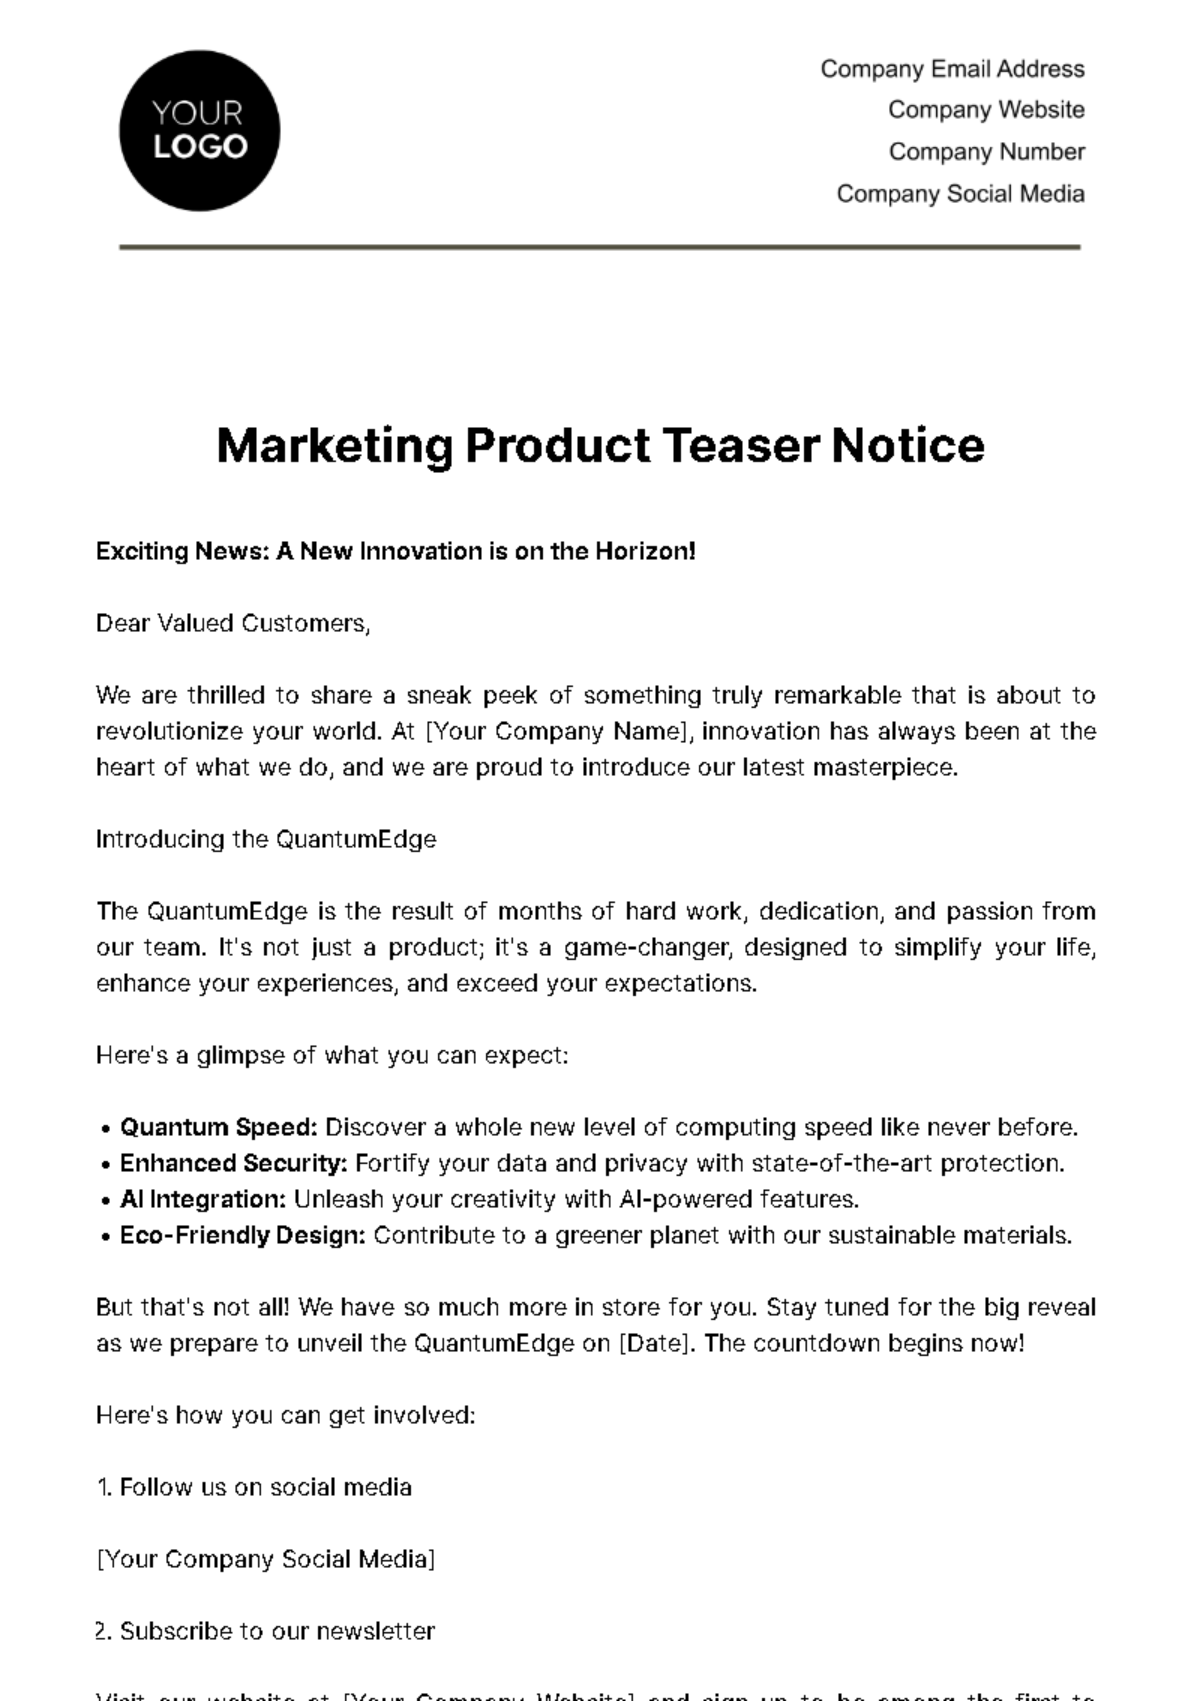 Free Marketing Product Teaser Notice Template